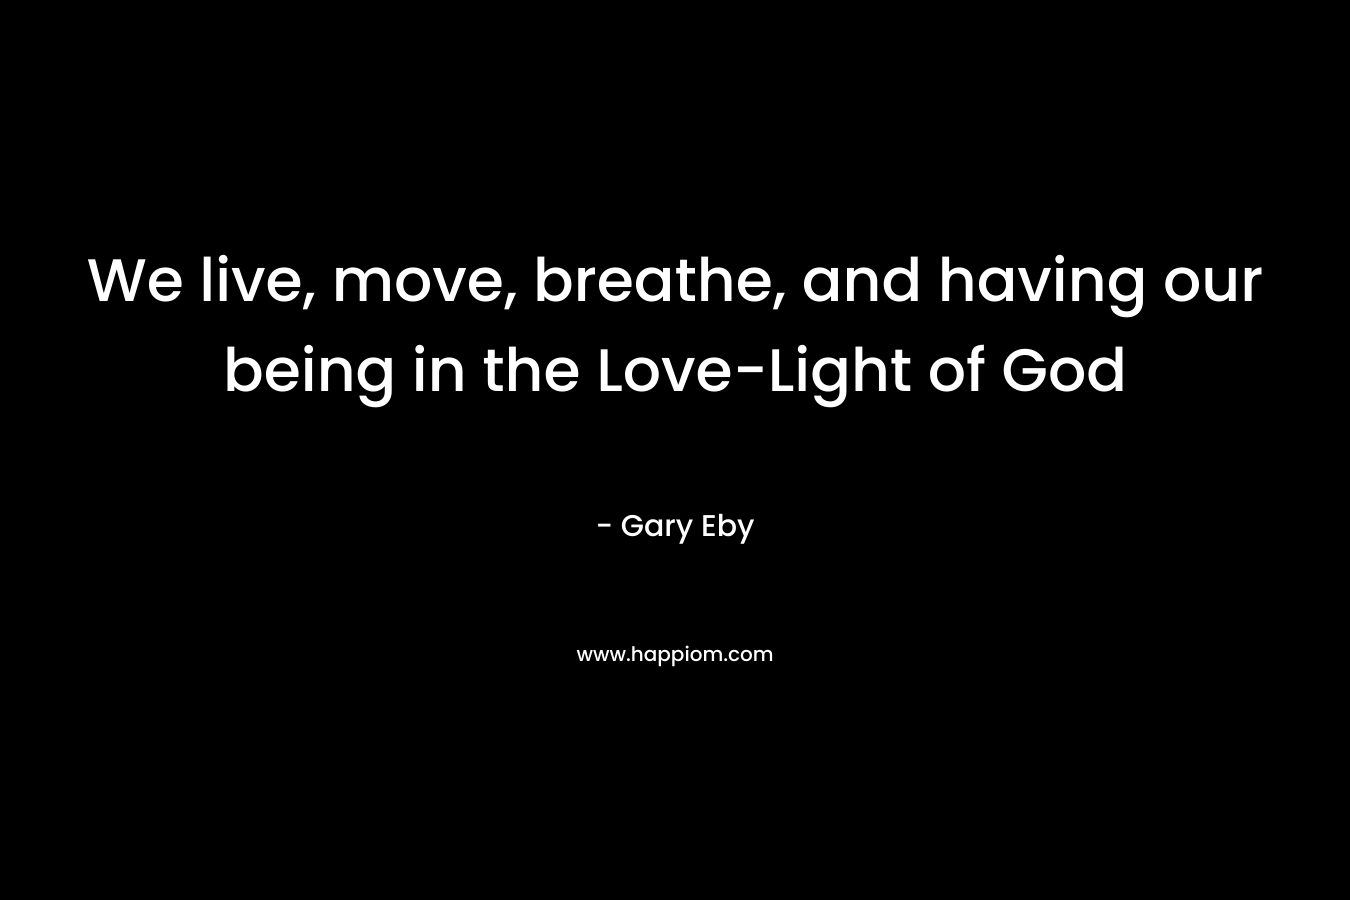 We live, move, breathe, and having our being in the Love-Light of God